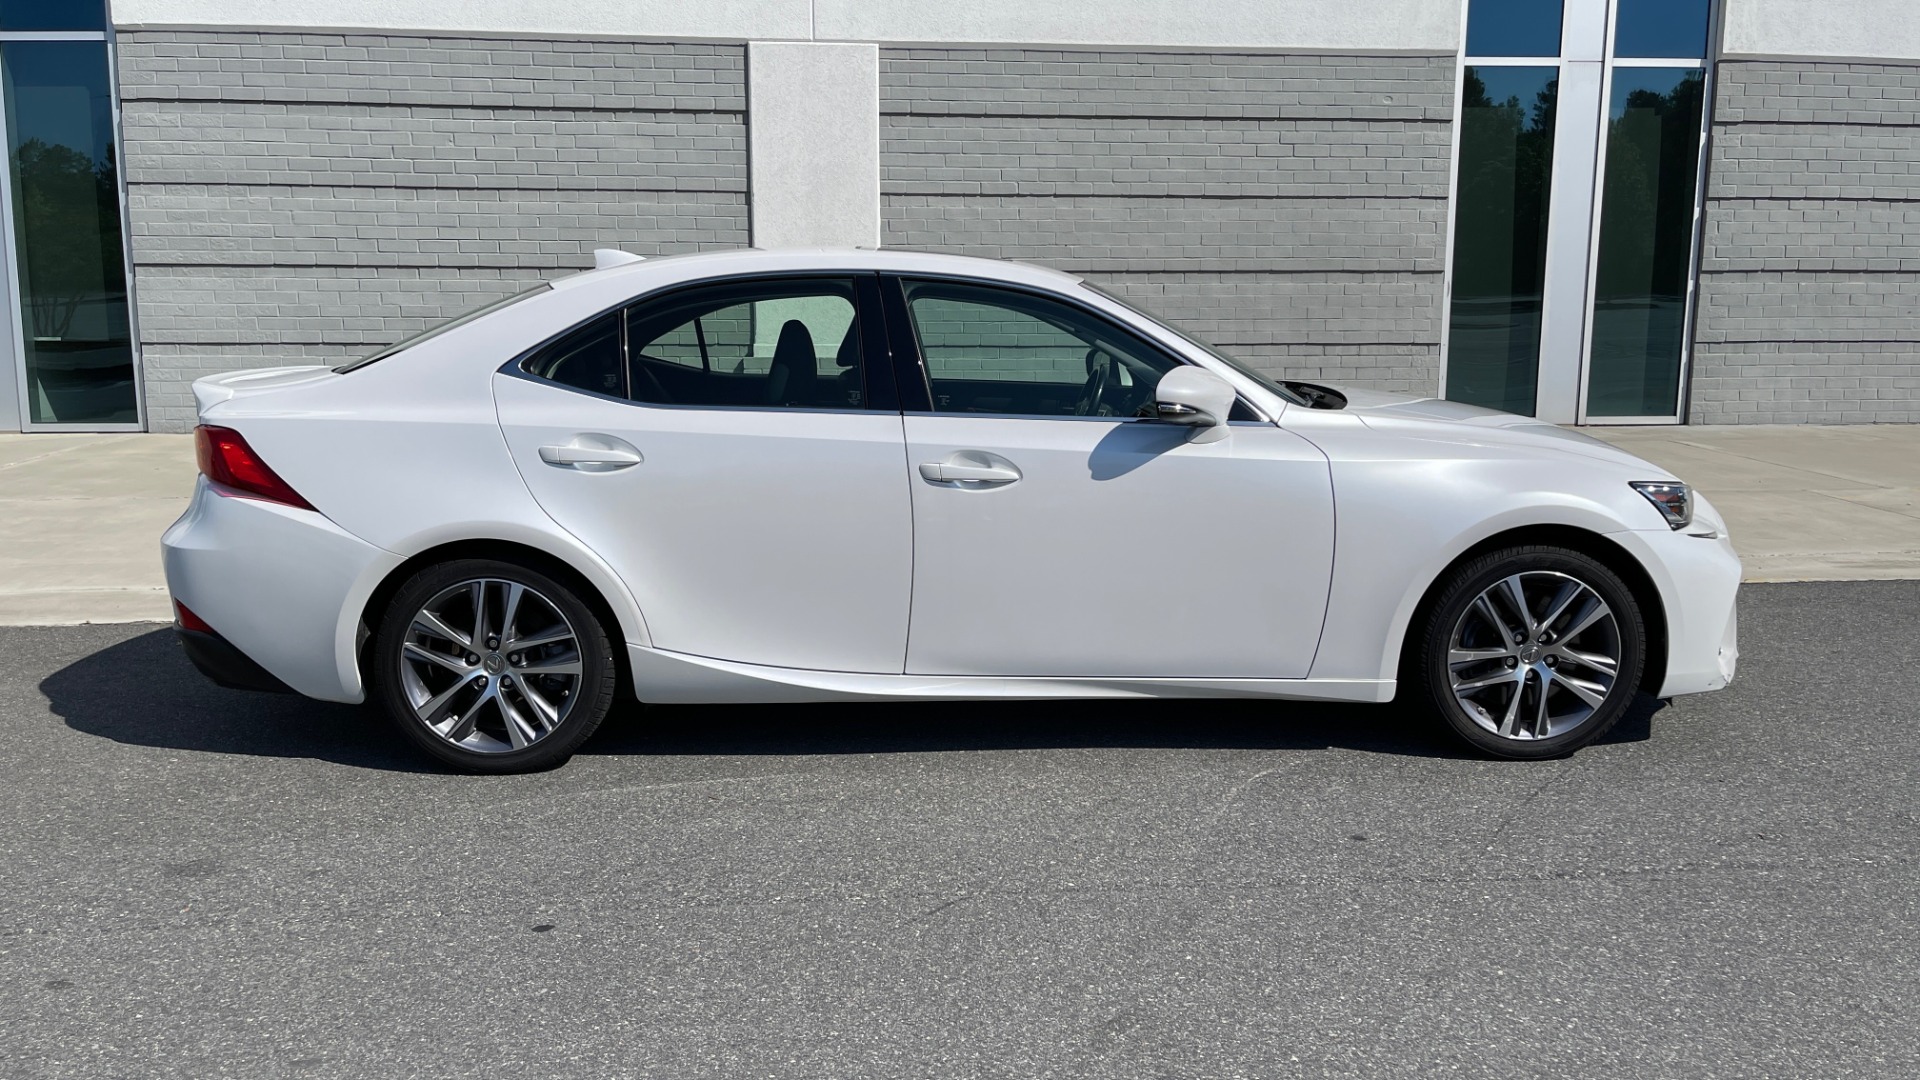 Used 2018 Lexus IS 300 / 2.0L TURBO / 8-SPD AUTO / SUNROOF / REARVIEW for sale Sold at Formula Imports in Charlotte NC 28227 7